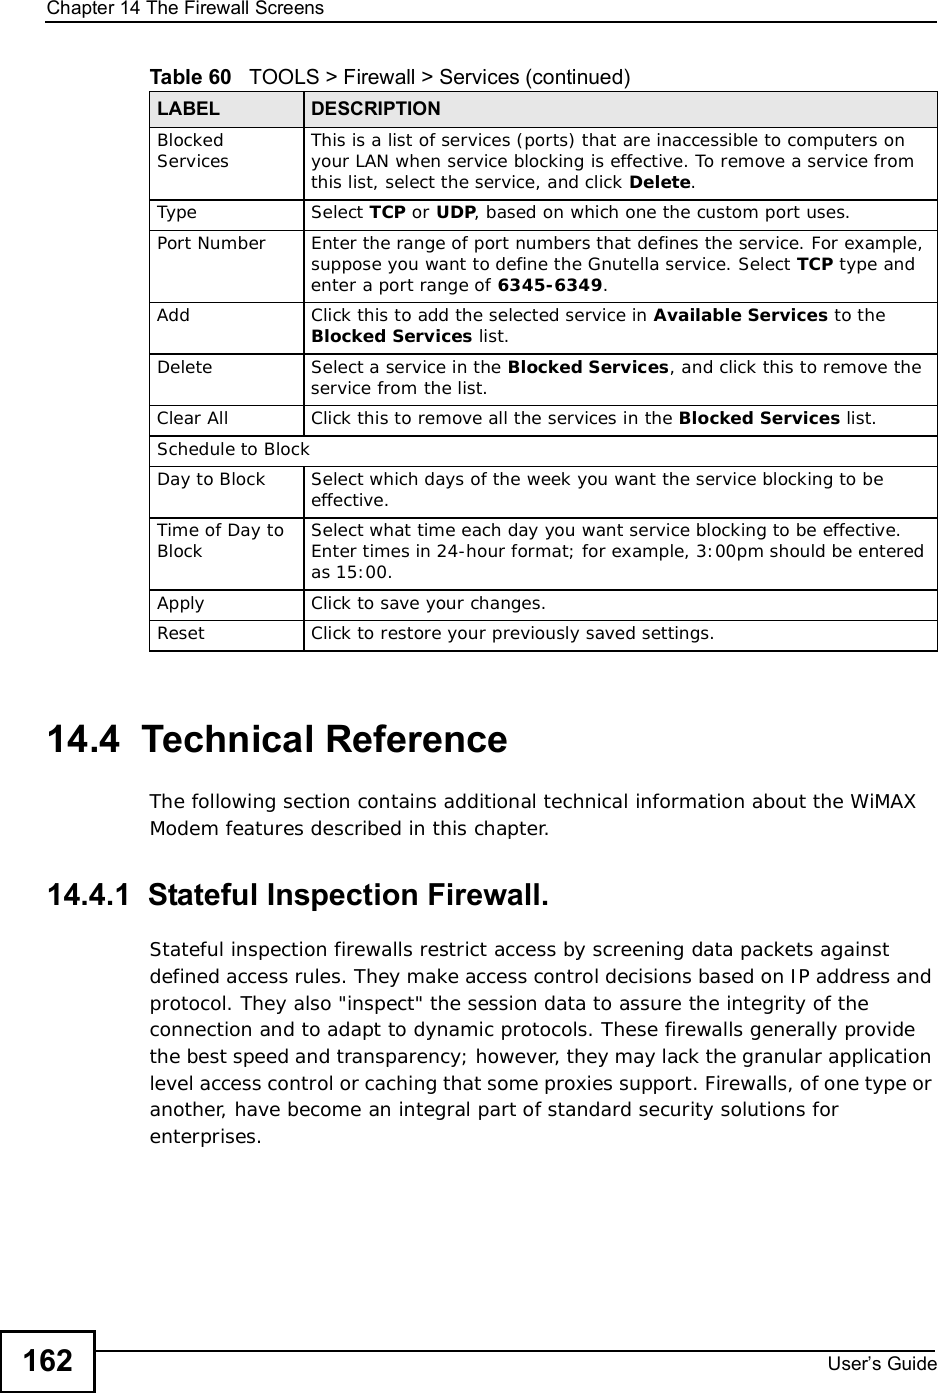 Chapter 14The Firewall ScreensUser s Guide16214.4  Technical ReferenceThe following section contains additional technical information about the WiMAX Modem features described in this chapter.14.4.1  Stateful Inspection Firewall.Stateful inspection firewalls restrict access by screening data packets against defined access rules. They make access control decisions based on IP address and protocol. They also &quot;inspect&quot; the session data to assure the integrity of the connection and to adapt to dynamic protocols. These firewalls generally provide the best speed and transparency; however, they may lack the granular application level access control or caching that some proxies support. Firewalls, of one type or another, have become an integral part of standard security solutions for enterprises.Blocked Services This is a list of services (ports) that are inaccessible to computers on your LAN when service blocking is effective. To remove a service from this list, select the service, and click Delete.Type Select TCP or UDP, based on which one the custom port uses.Port Number Enter the range of port numbers that defines the service. For example, suppose you want to define the Gnutella service. Select TCP type and enter a port range of 6345-6349.Add Click this to add the selected service in Available Services to the Blocked Services list.Delete Select a service in the Blocked Services, and click this to remove the service from the list.Clear All Click this to remove all the services in the Blocked Services list.Schedule to BlockDay to Block Select which days of the week you want the service blocking to be effective.Time of Day to Block Select what time each day you want service blocking to be effective. Enter times in 24-hour format; for example, 3:00pm should be entered as 15:00.Apply Click to save your changes.Reset Click to restore your previously saved settings.Table 60   TOOLS &gt; Firewall &gt; Services (continued)LABEL DESCRIPTION